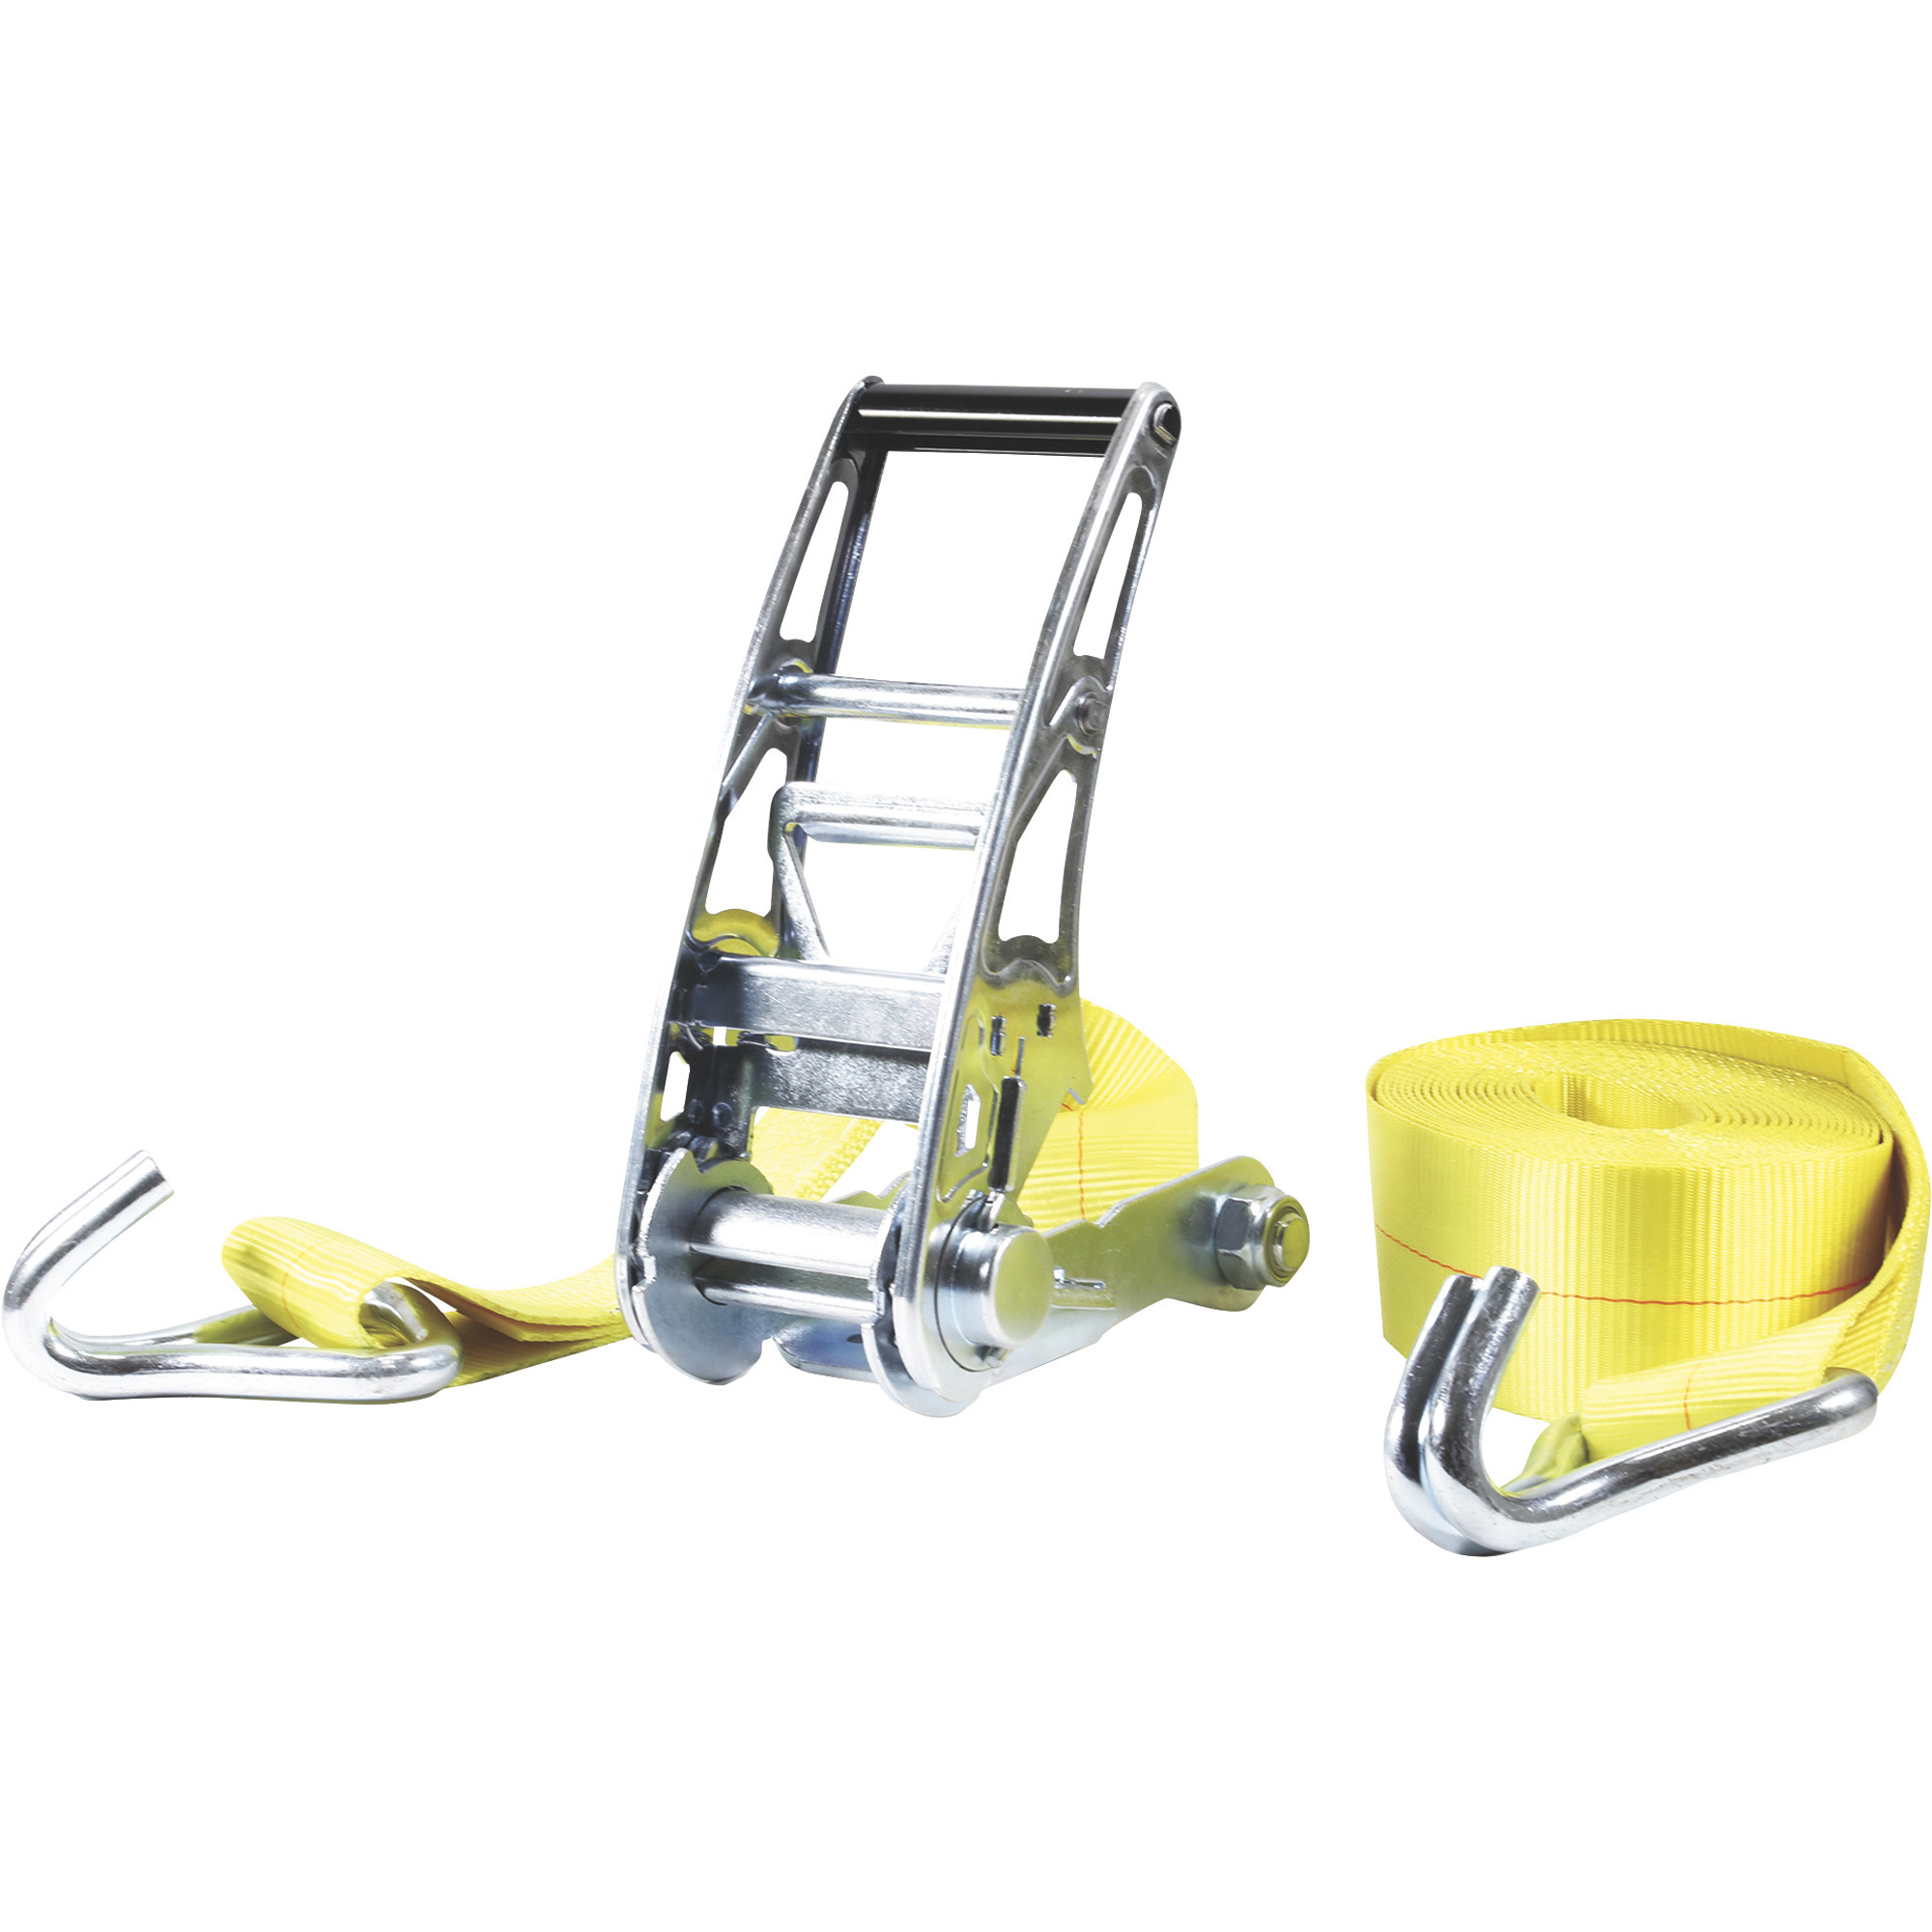 SmartStraps Commercial-Grade Stamped Ratchet Tie-Down Strap, 3Inch x 27ft., with J-Hook, 15,000-Lb. Breaking Strength, Yellow, Model 4517